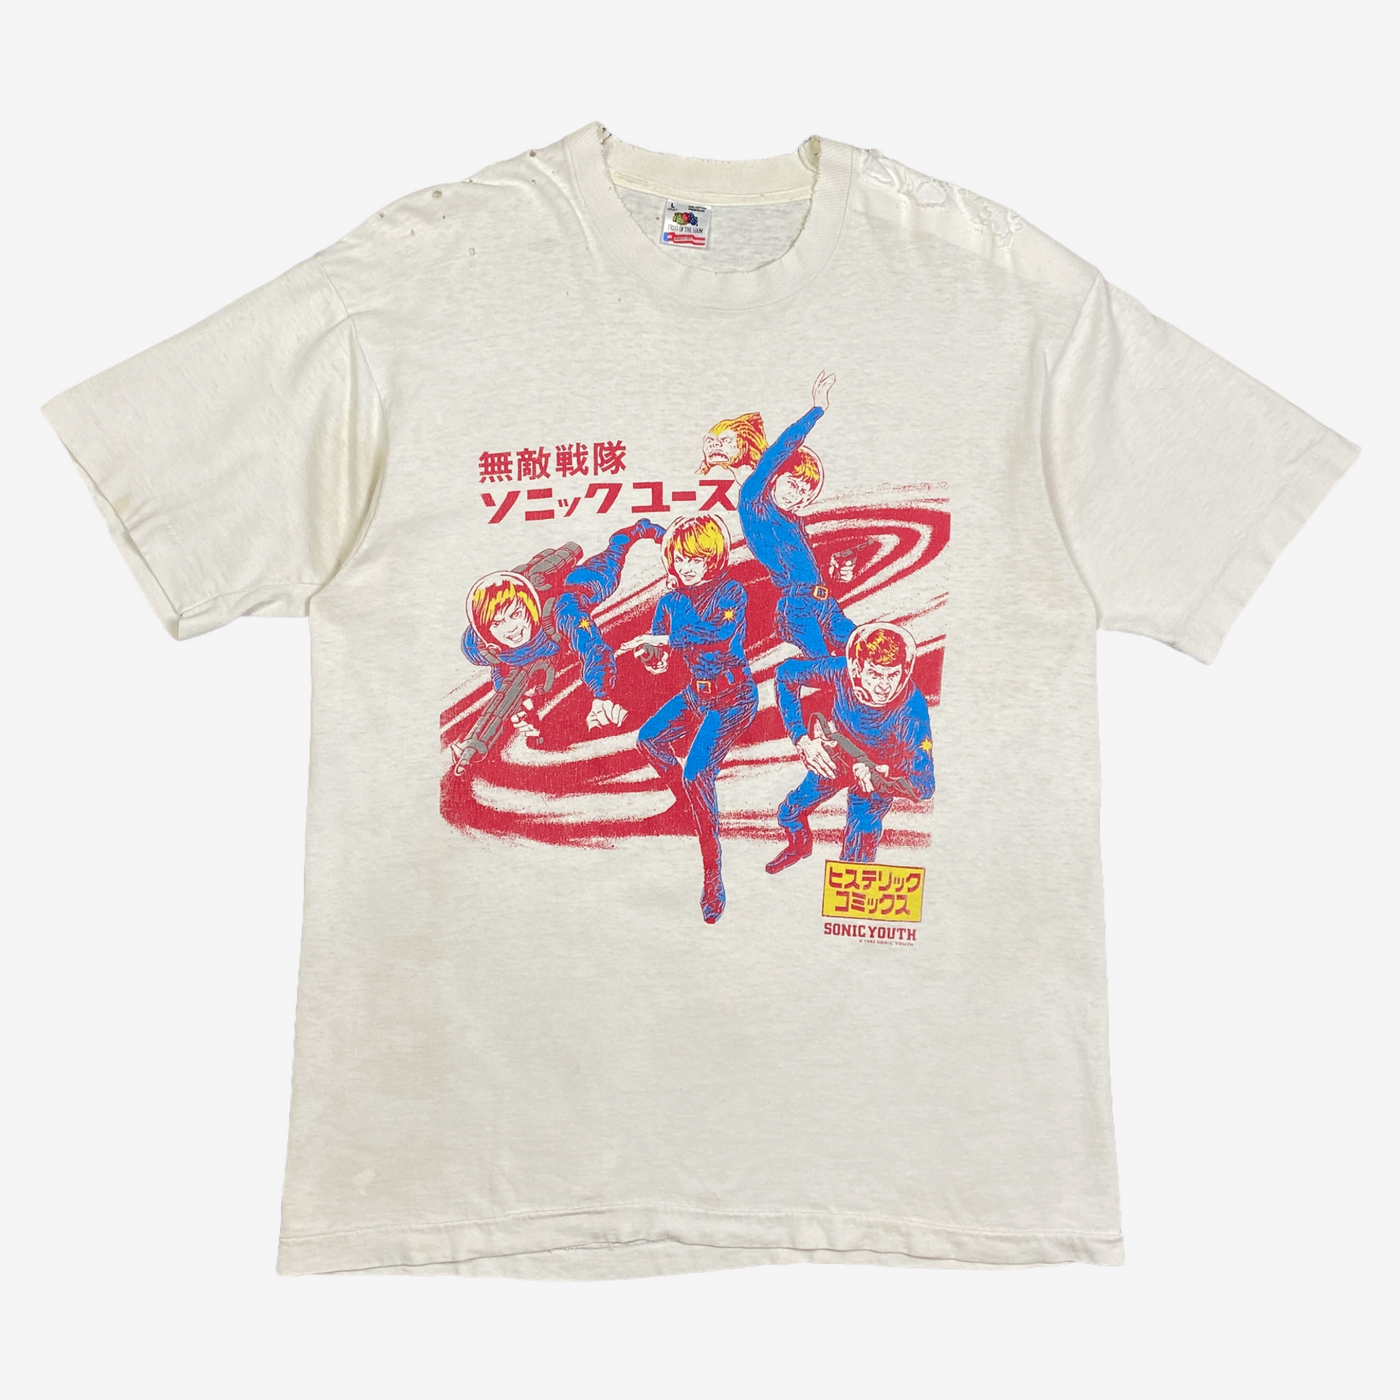 1992 SONIC YOUTH T-SHIRT – JERKS™